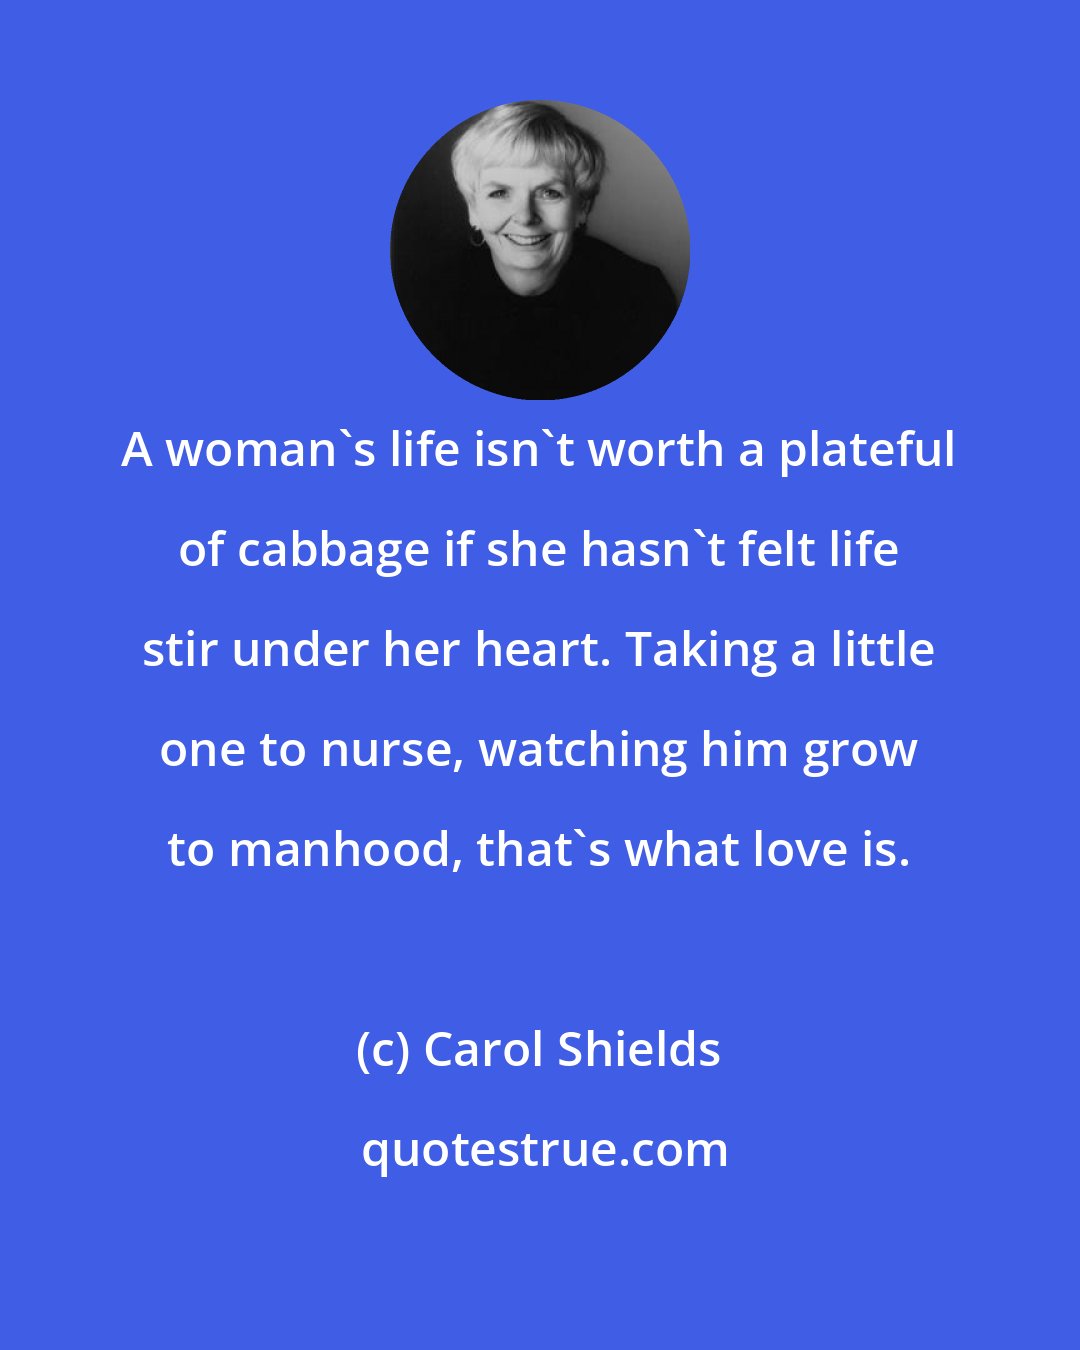 Carol Shields: A woman's life isn't worth a plateful of cabbage if she hasn't felt life stir under her heart. Taking a little one to nurse, watching him grow to manhood, that's what love is.